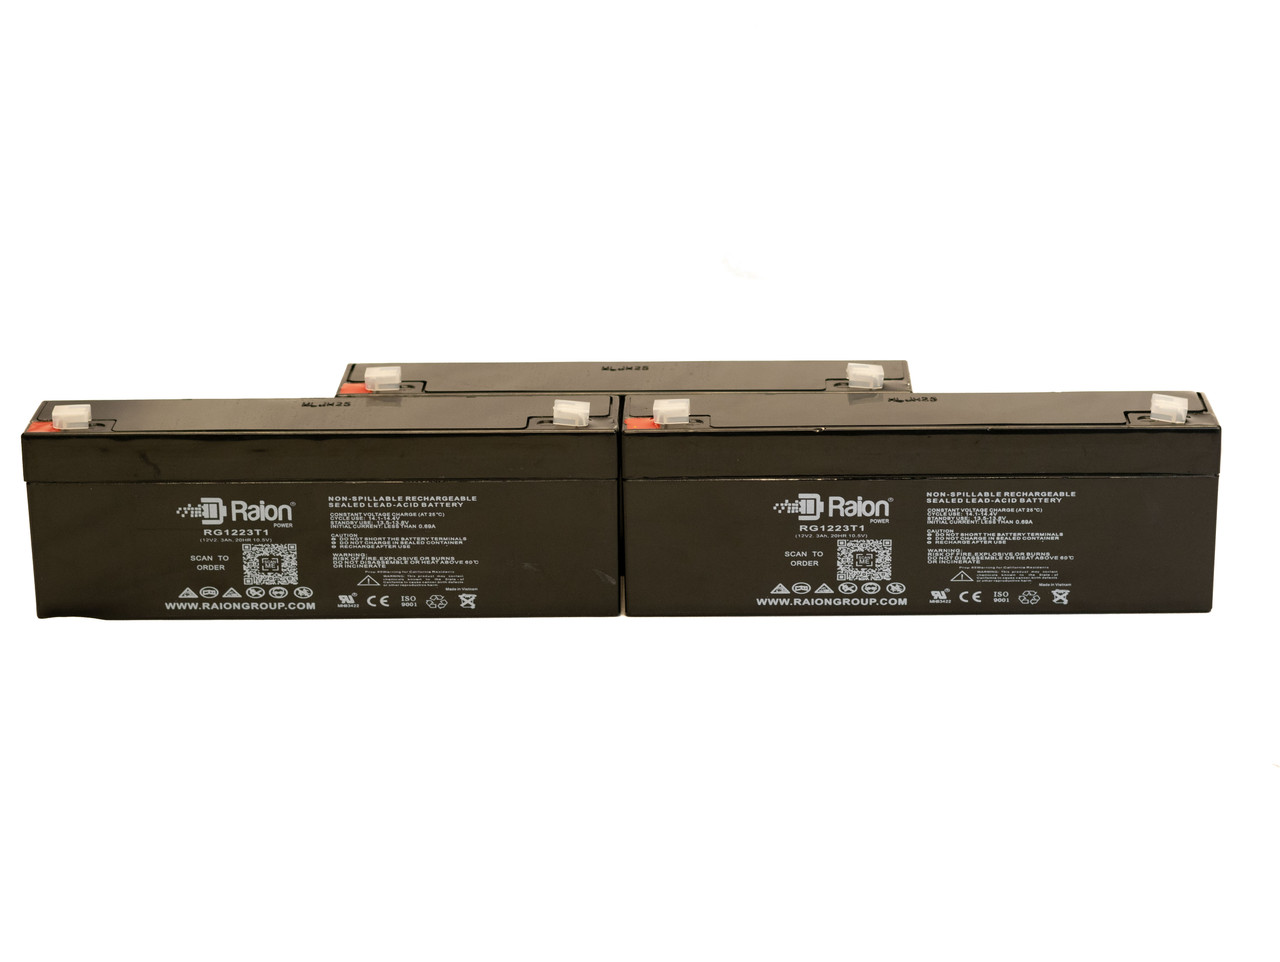 Raion Power 12V 2.3Ah RG1223T1 Replacement Medical Battery for Invivo 4500 MRI - 3 Pack